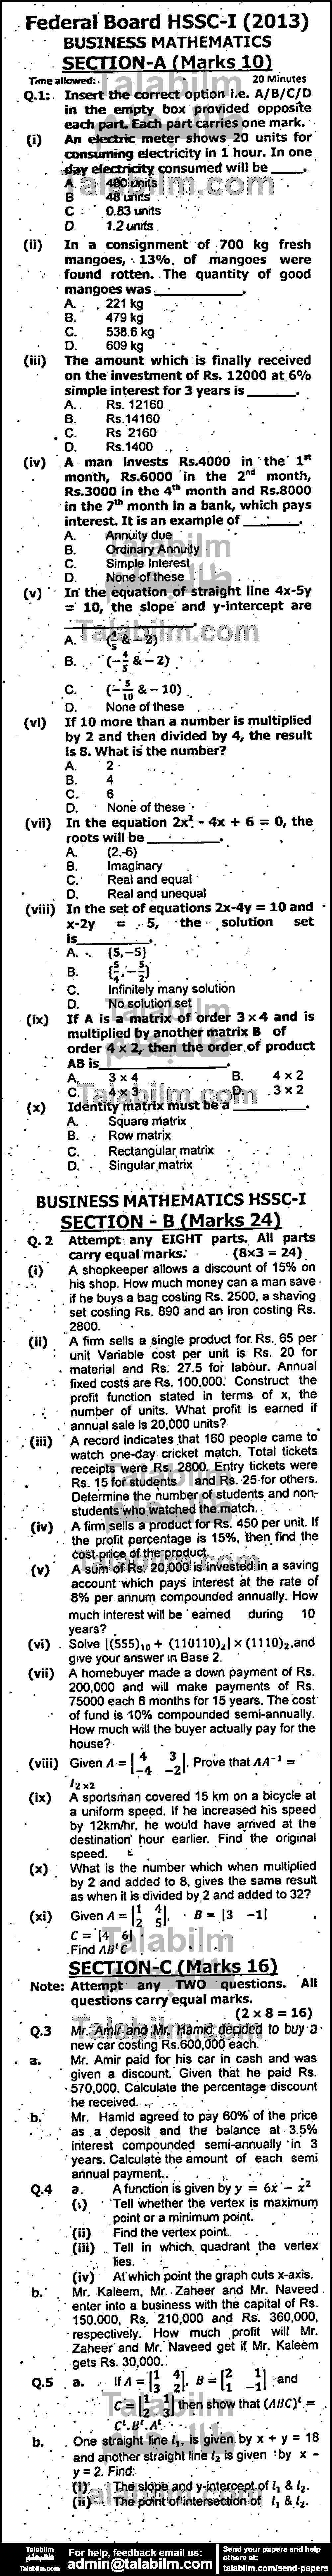 Business Mathematics 0 past paper for Group-I 2013